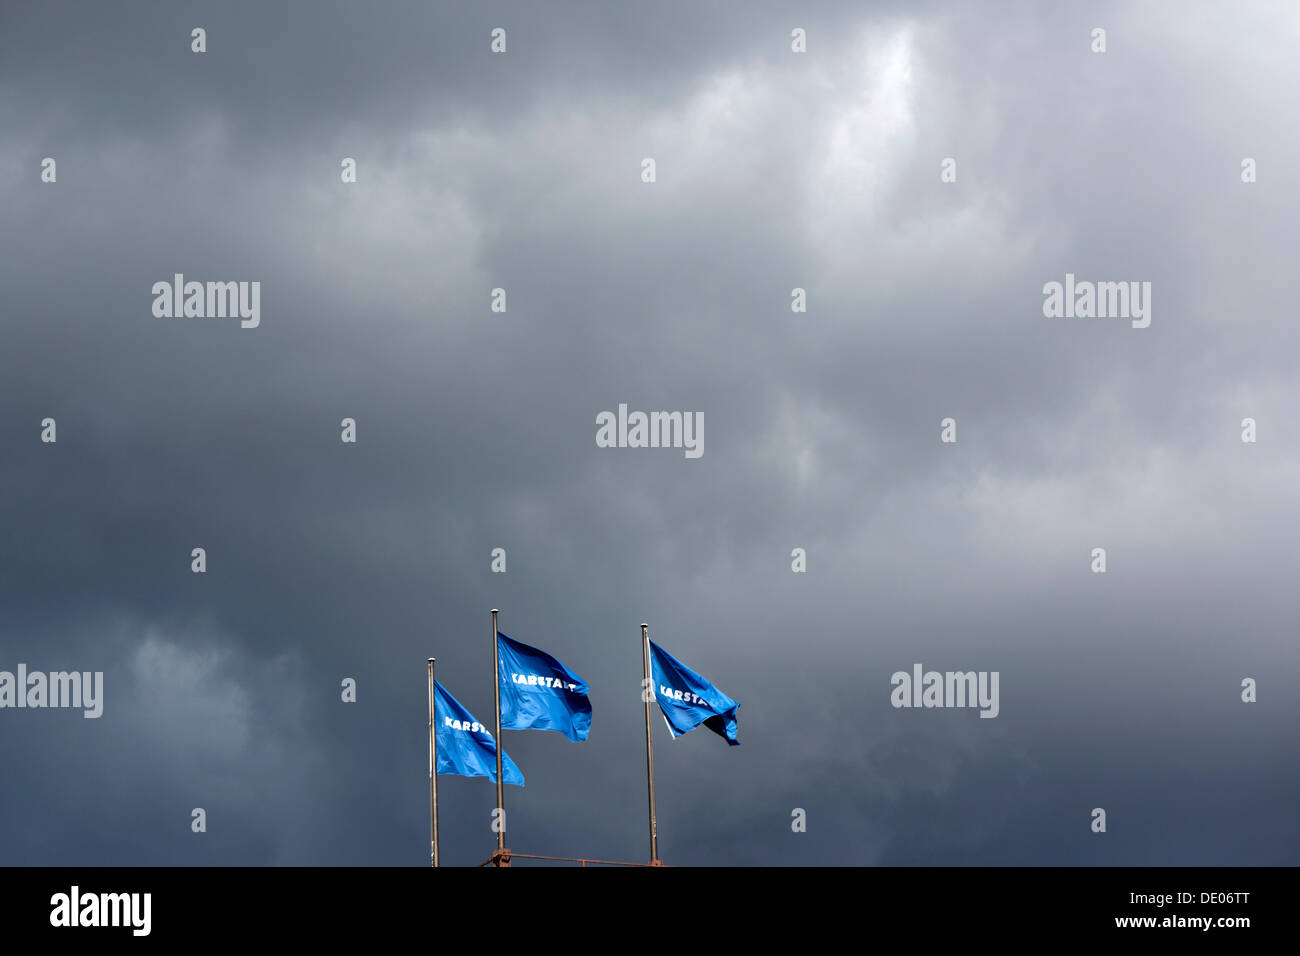 Flags of Karstadt, dark clouds, storms, symbolic image Stock Photo